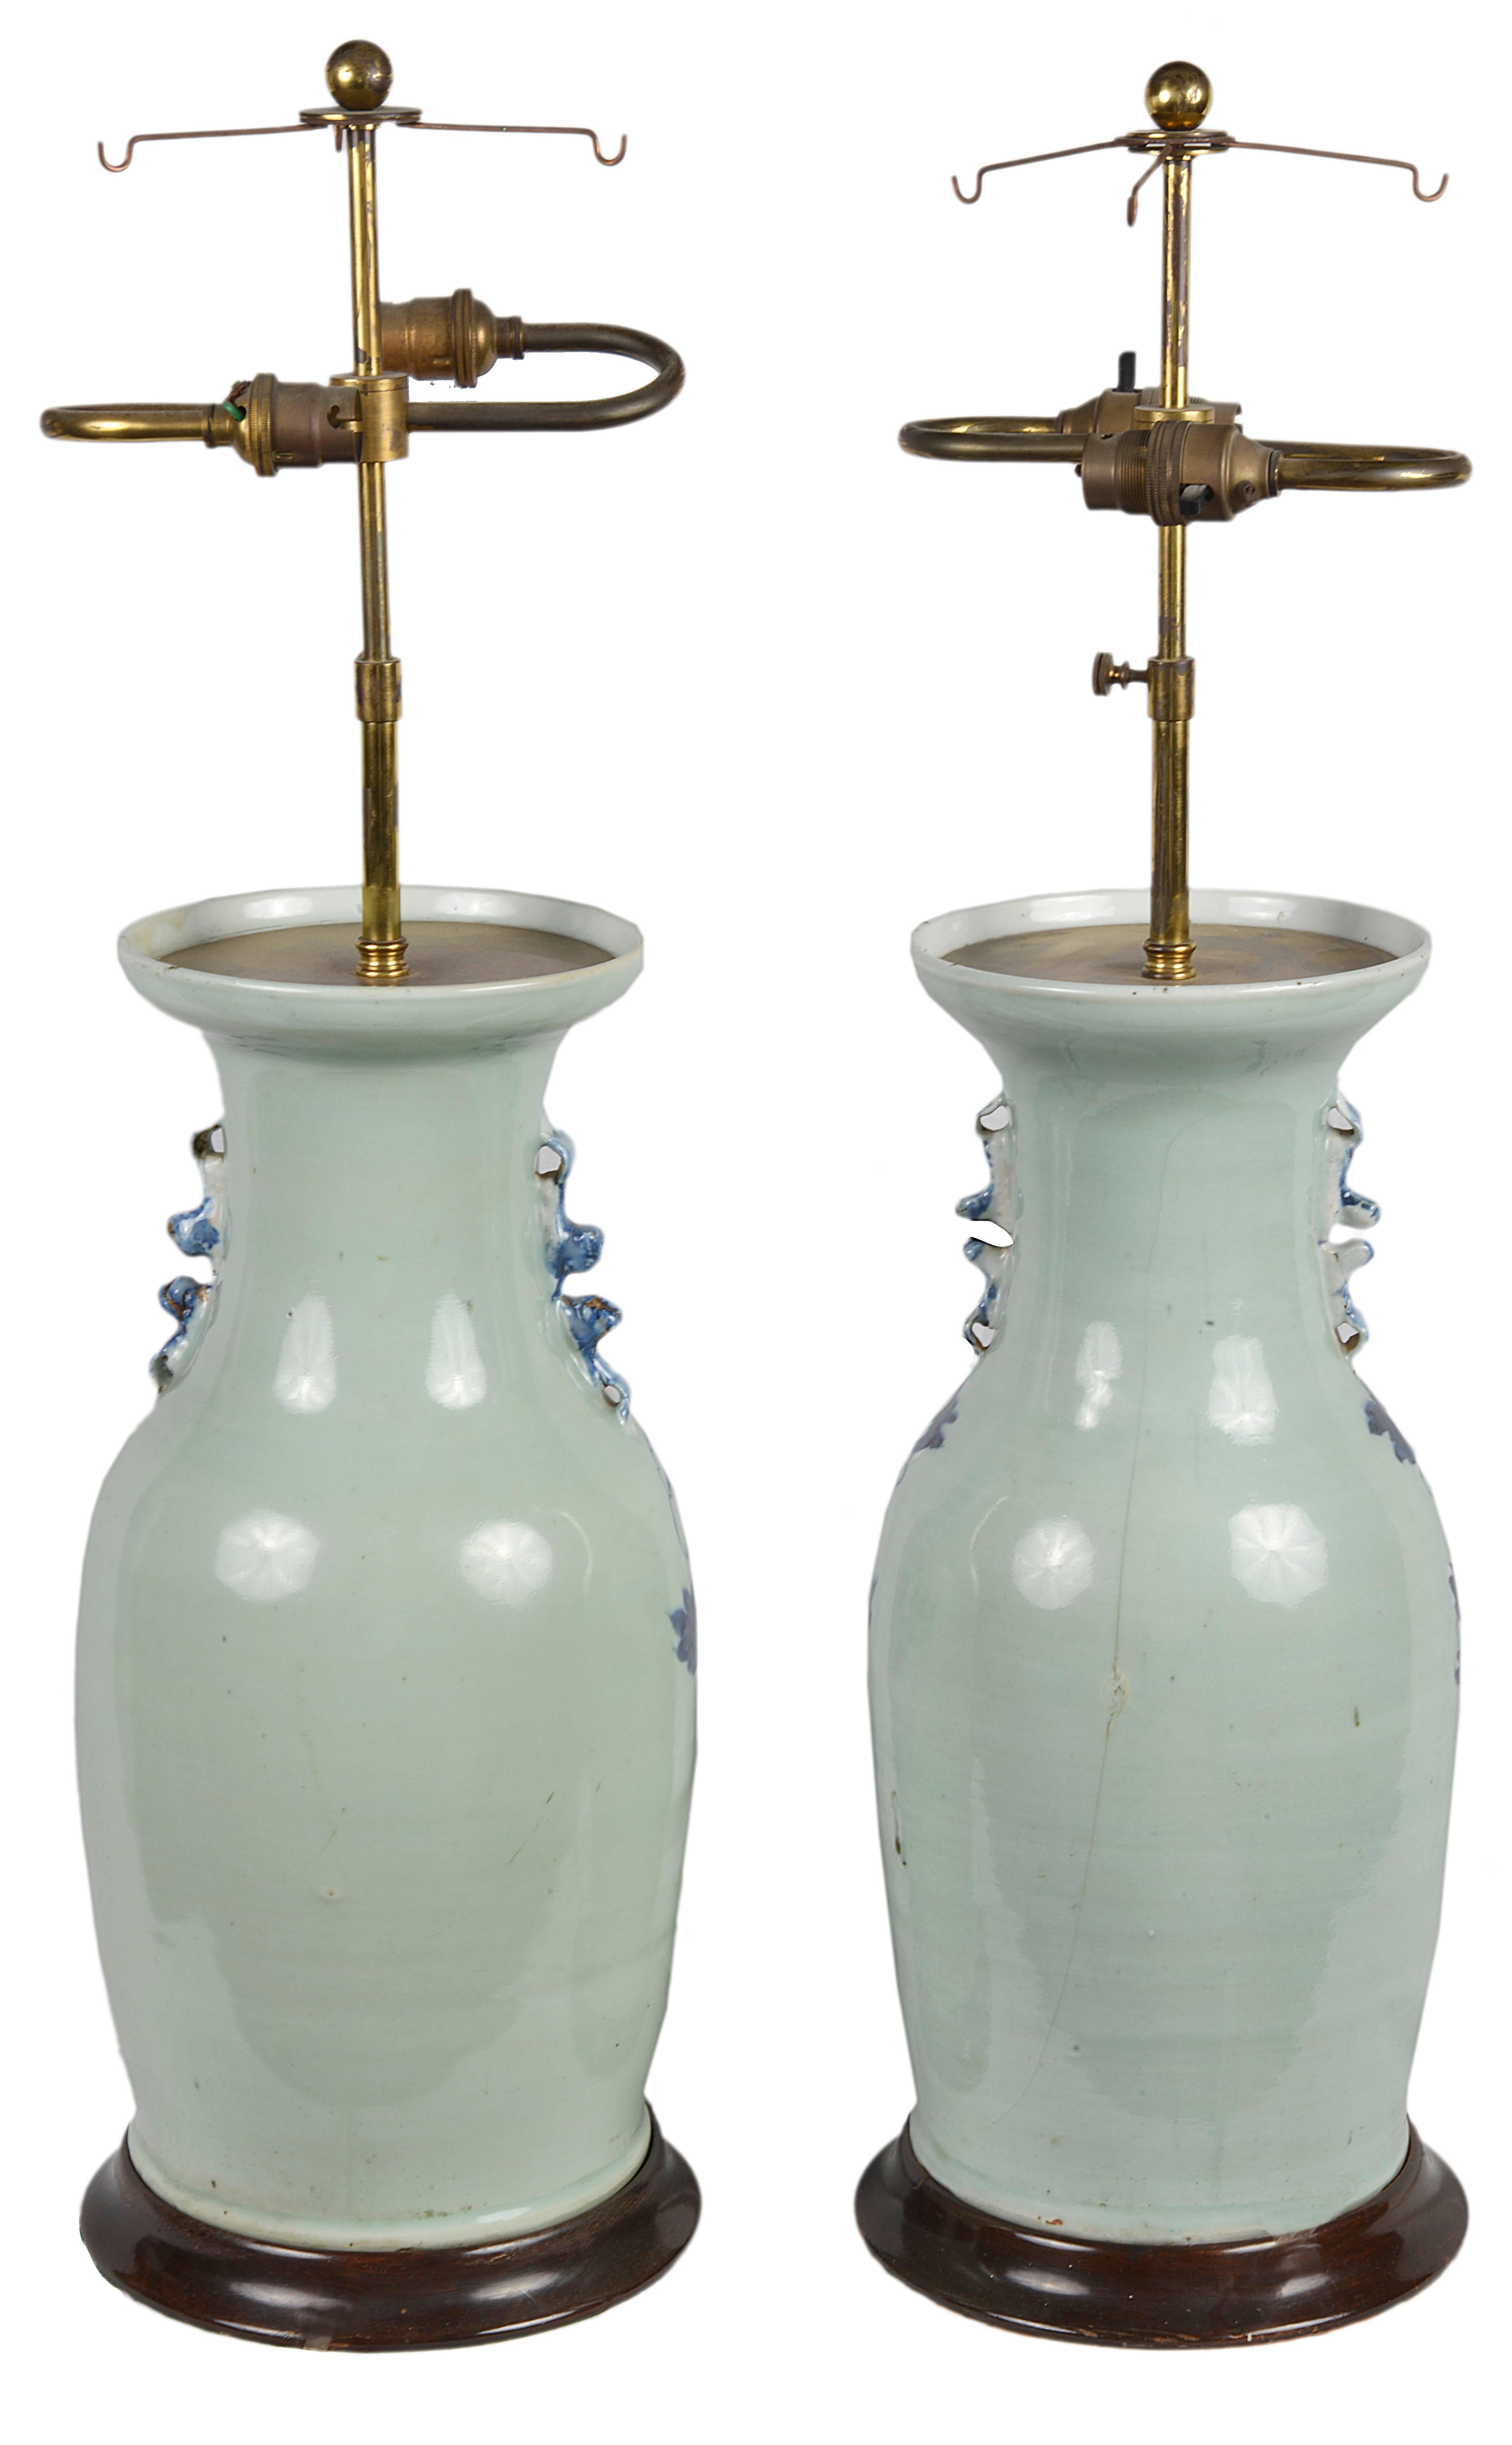 A good quality pair of late 19th century Chinese blue and White vases, depicting flowers, exotic birds and foliage, set on ebonised bases and converted to lamps.